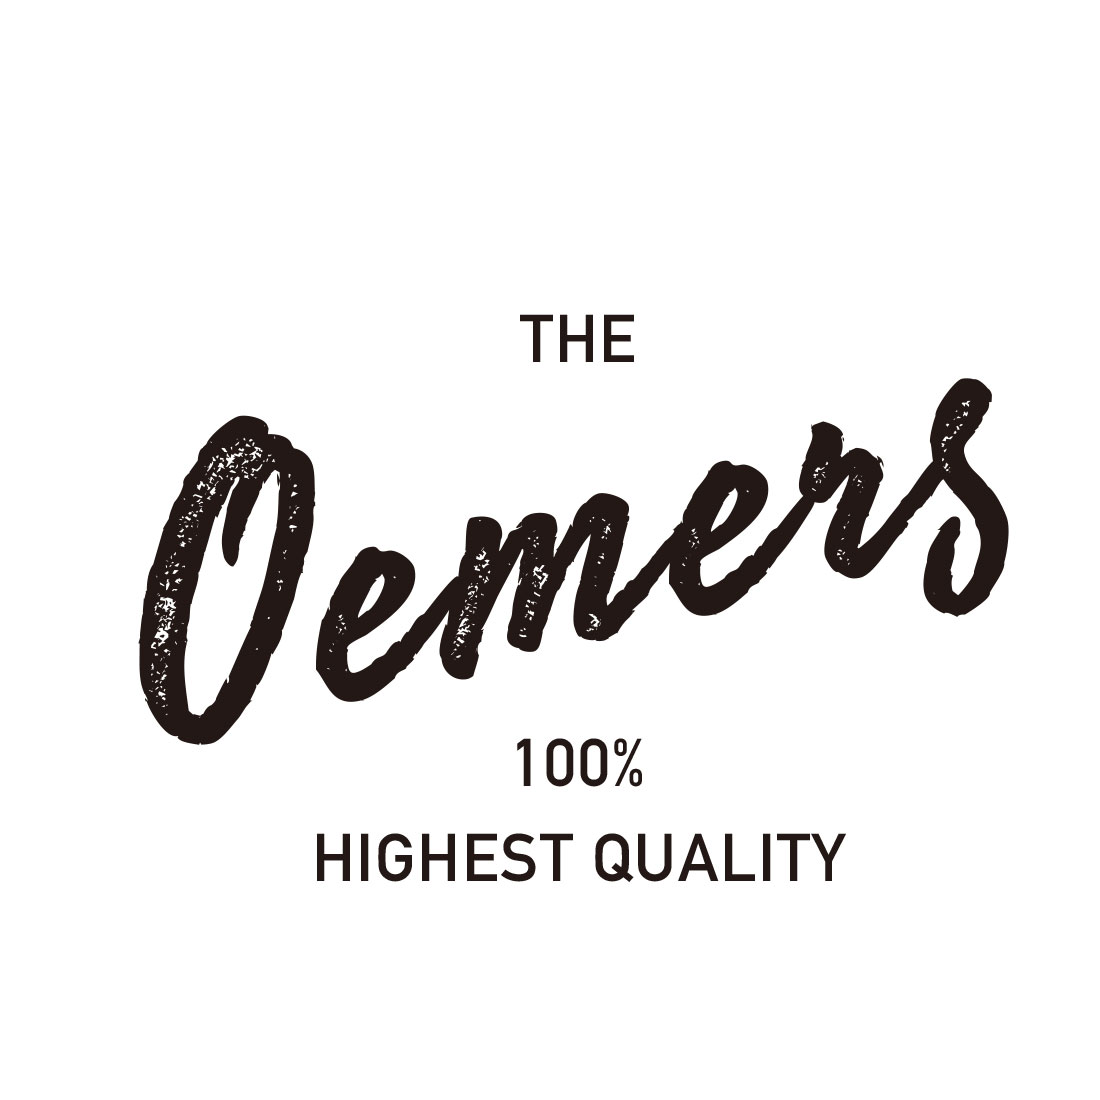 190602 – OEMERS#12